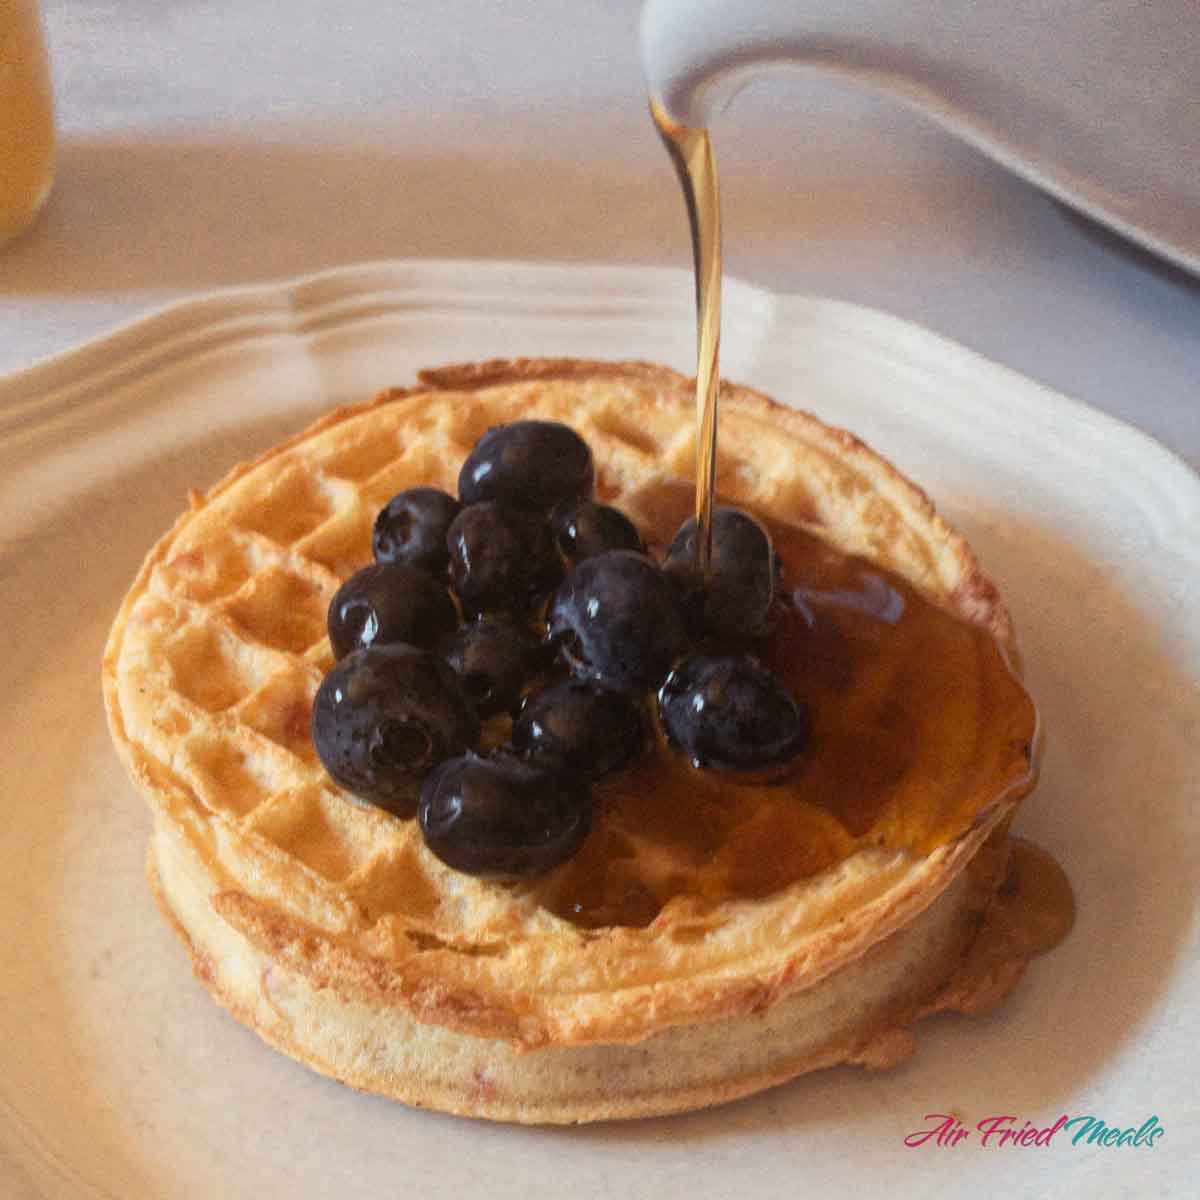 Syrup being poured on waffles with blueberries on top.